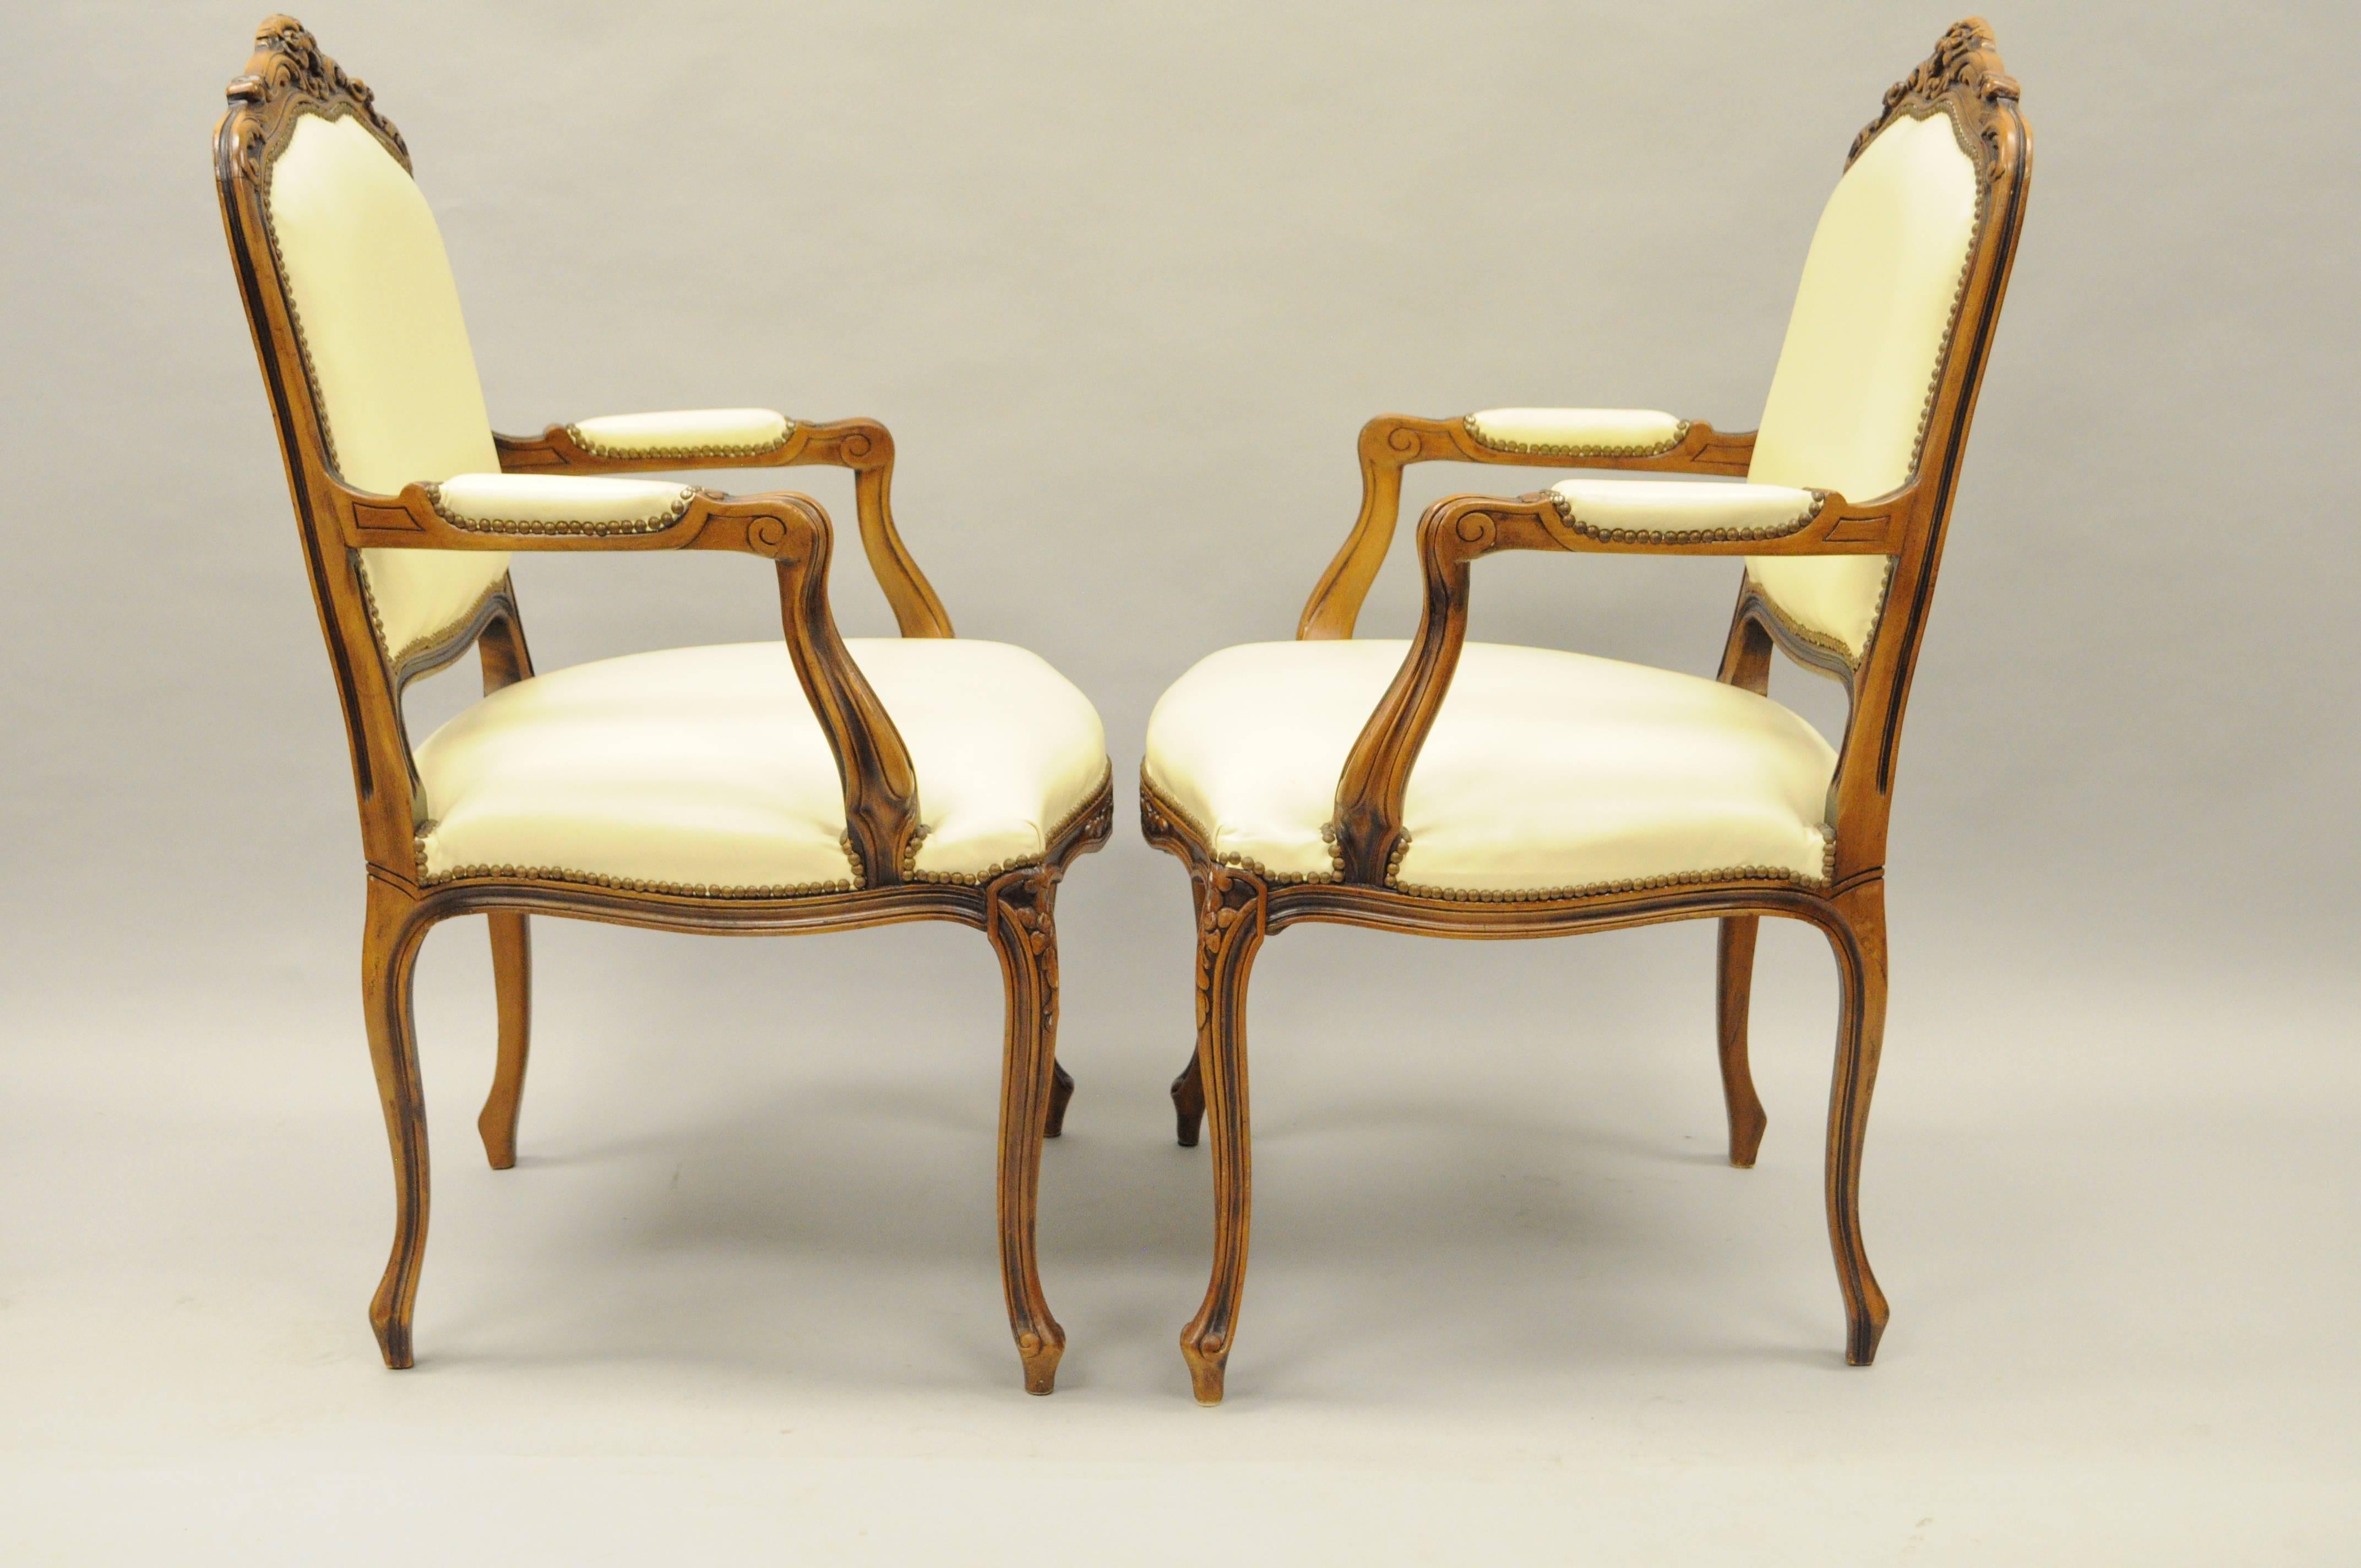 Carved Pair of Vintage French Country Louis XV Style Italian Arm Chairs by Chateau d'Ax